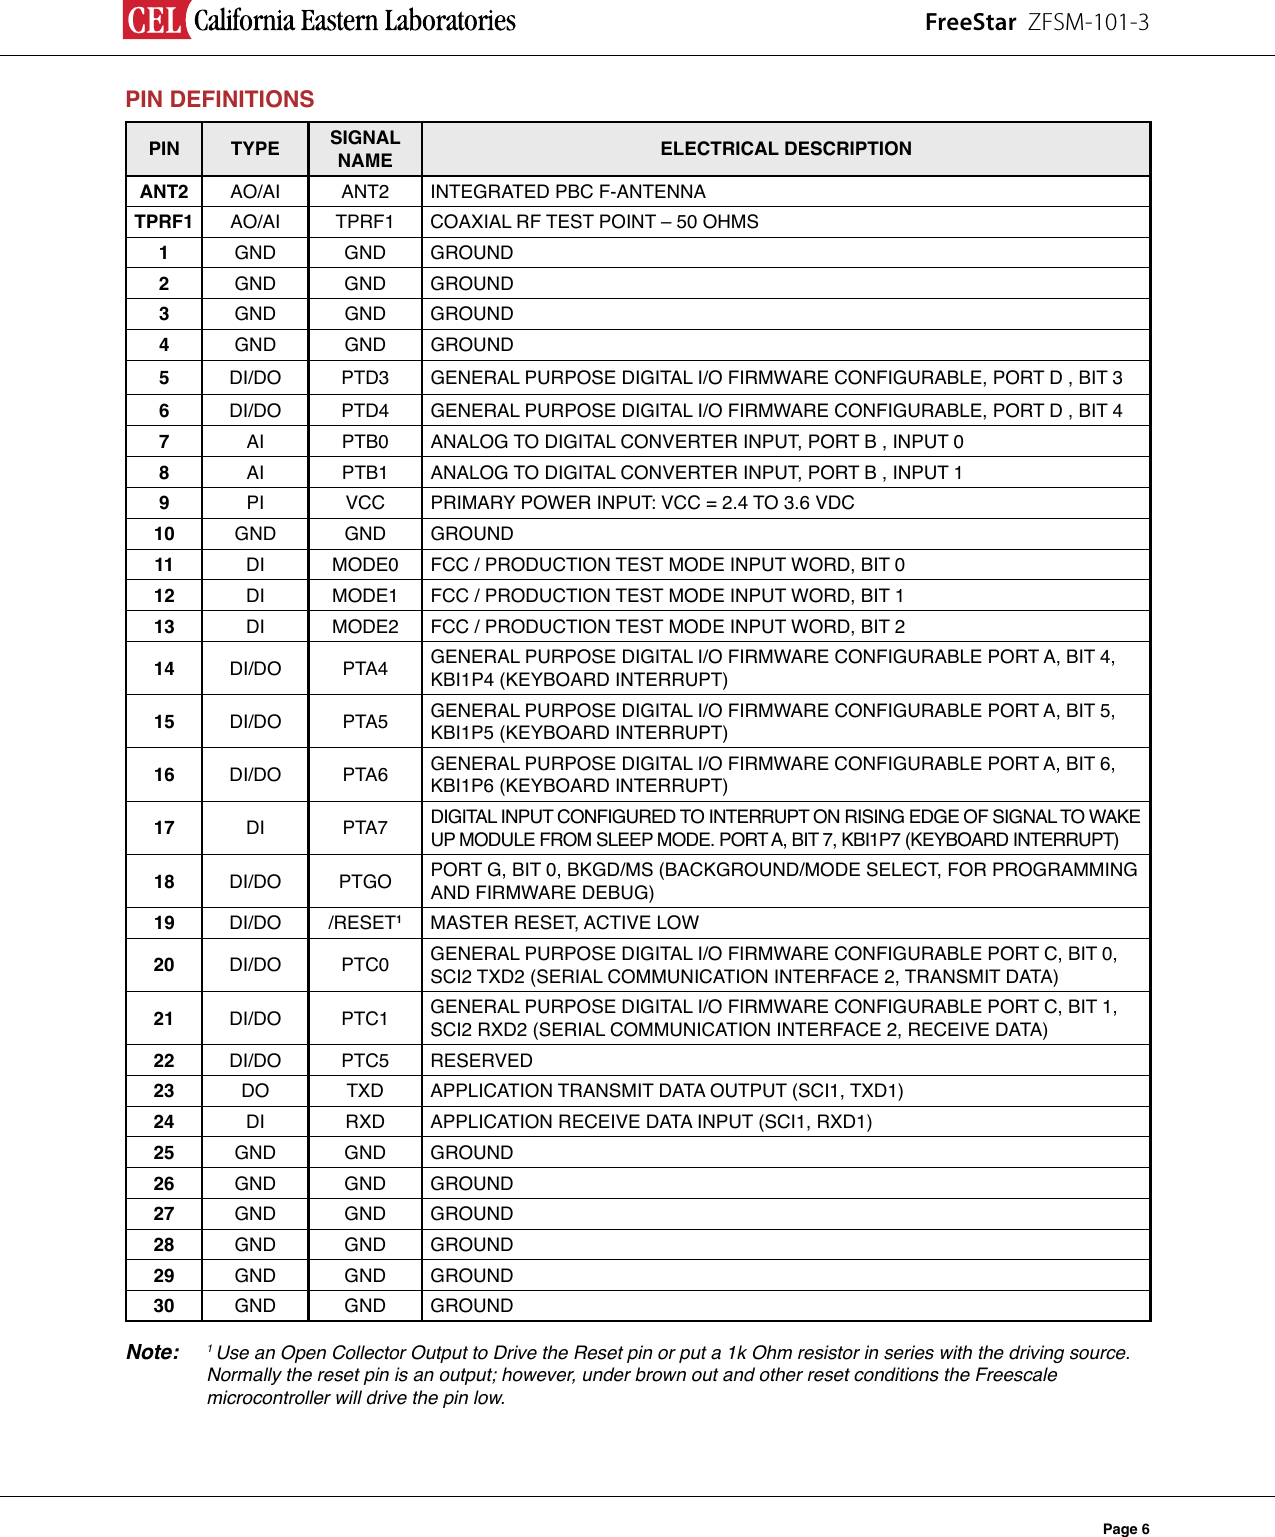 FreeStar  ZFSM-101-3Page 6PIN DEFINITIONSPIN   TYPE SIGNAL  NAME  ELECTRICAL DESCRIPTIONANT2 AO/AI ANT2 INTEGRATED PBC F-ANTENNATPRF1 AO/AI TPRF1 COAXIAL RF TEST POINT – 50 OHMS1GND GND GROUND2GND GND GROUND3GND GND GROUND4GND GND GROUND5DI/DO PTD3 GENERAL PURPOSE DIGITAL I/O FIRMWARE CONFIGURABLE, PORT D , BIT 36DI/DO PTD4 GENERAL PURPOSE DIGITAL I/O FIRMWARE CONFIGURABLE, PORT D , BIT 47AI PTB0 ANALOG TO DIGITAL CONVERTER INPUT, PORT B , INPUT 0                      8AI PTB1 ANALOG TO DIGITAL CONVERTER INPUT, PORT B , INPUT 19PI VCC PRIMARY POWER INPUT: VCC = 2.4 TO 3.6 VDC10 GND GND GROUND11 DI MODE0 FCC / PRODUCTION TEST MODE INPUT WORD, BIT 012 DI MODE1 FCC / PRODUCTION TEST MODE INPUT WORD, BIT 113 DI MODE2 FCC / PRODUCTION TEST MODE INPUT WORD, BIT 214 DI/DO PTA4 GENERAL PURPOSE DIGITAL I/O FIRMWARE CONFIGURABLE PORT A, BIT 4, KBI1P4 (KEYBOARD INTERRUPT)                                      15 DI/DO PTA5 GENERAL PURPOSE DIGITAL I/O FIRMWARE CONFIGURABLE PORT A, BIT 5, KBI1P5 (KEYBOARD INTERRUPT)                                      16 DI/DO PTA6 GENERAL PURPOSE DIGITAL I/O FIRMWARE CONFIGURABLE PORT A, BIT 6, KBI1P6 (KEYBOARD INTERRUPT)                                      17 DI PTA7 DIGITAL INPUT CONFIGURED TO INTERRUPT ON RISING EDGE OF SIGNAL TO WAKE UP MODULE FROM SLEEP MODE. PORT A, BIT 7, KBI1P7 (KEYBOARD INTERRUPT)      18 DI/DO PTGO PORT G, BIT 0, BKGD/MS (BACKGROUND/MODE SELECT, FOR PROGRAMMING AND FIRMWARE DEBUG)19 DI/DO /RESET1MASTER RESET, ACTIVE LOW20 DI/DO PTC0 GENERAL PURPOSE DIGITAL I/O FIRMWARE CONFIGURABLE PORT C, BIT 0, SCI2 TXD2 (SERIAL COMMUNICATION INTERFACE 2, TRANSMIT DATA)             21 DI/DO PTC1 GENERAL PURPOSE DIGITAL I/O FIRMWARE CONFIGURABLE PORT C, BIT 1, SCI2 RXD2 (SERIAL COMMUNICATION INTERFACE 2, RECEIVE DATA)22 DI/DO PTC5 RESERVED                                      23 DO TXD APPLICATION TRANSMIT DATA OUTPUT (SCI1, TXD1)24 DI RXD APPLICATION RECEIVE DATA INPUT (SCI1, RXD1)25 GND GND GROUND26 GND GND GROUND27 GND GND GROUND28 GND GND GROUND29 GND GND GROUND30 GND GND GROUNDNote: 1 Use an Open Collector Output to Drive the Reset pin or put a 1k Ohm resistor in series with the driving source.   Normally the reset pin is an output; however, under brown out and other reset conditions the Freescale      microcontroller will drive the pin low.